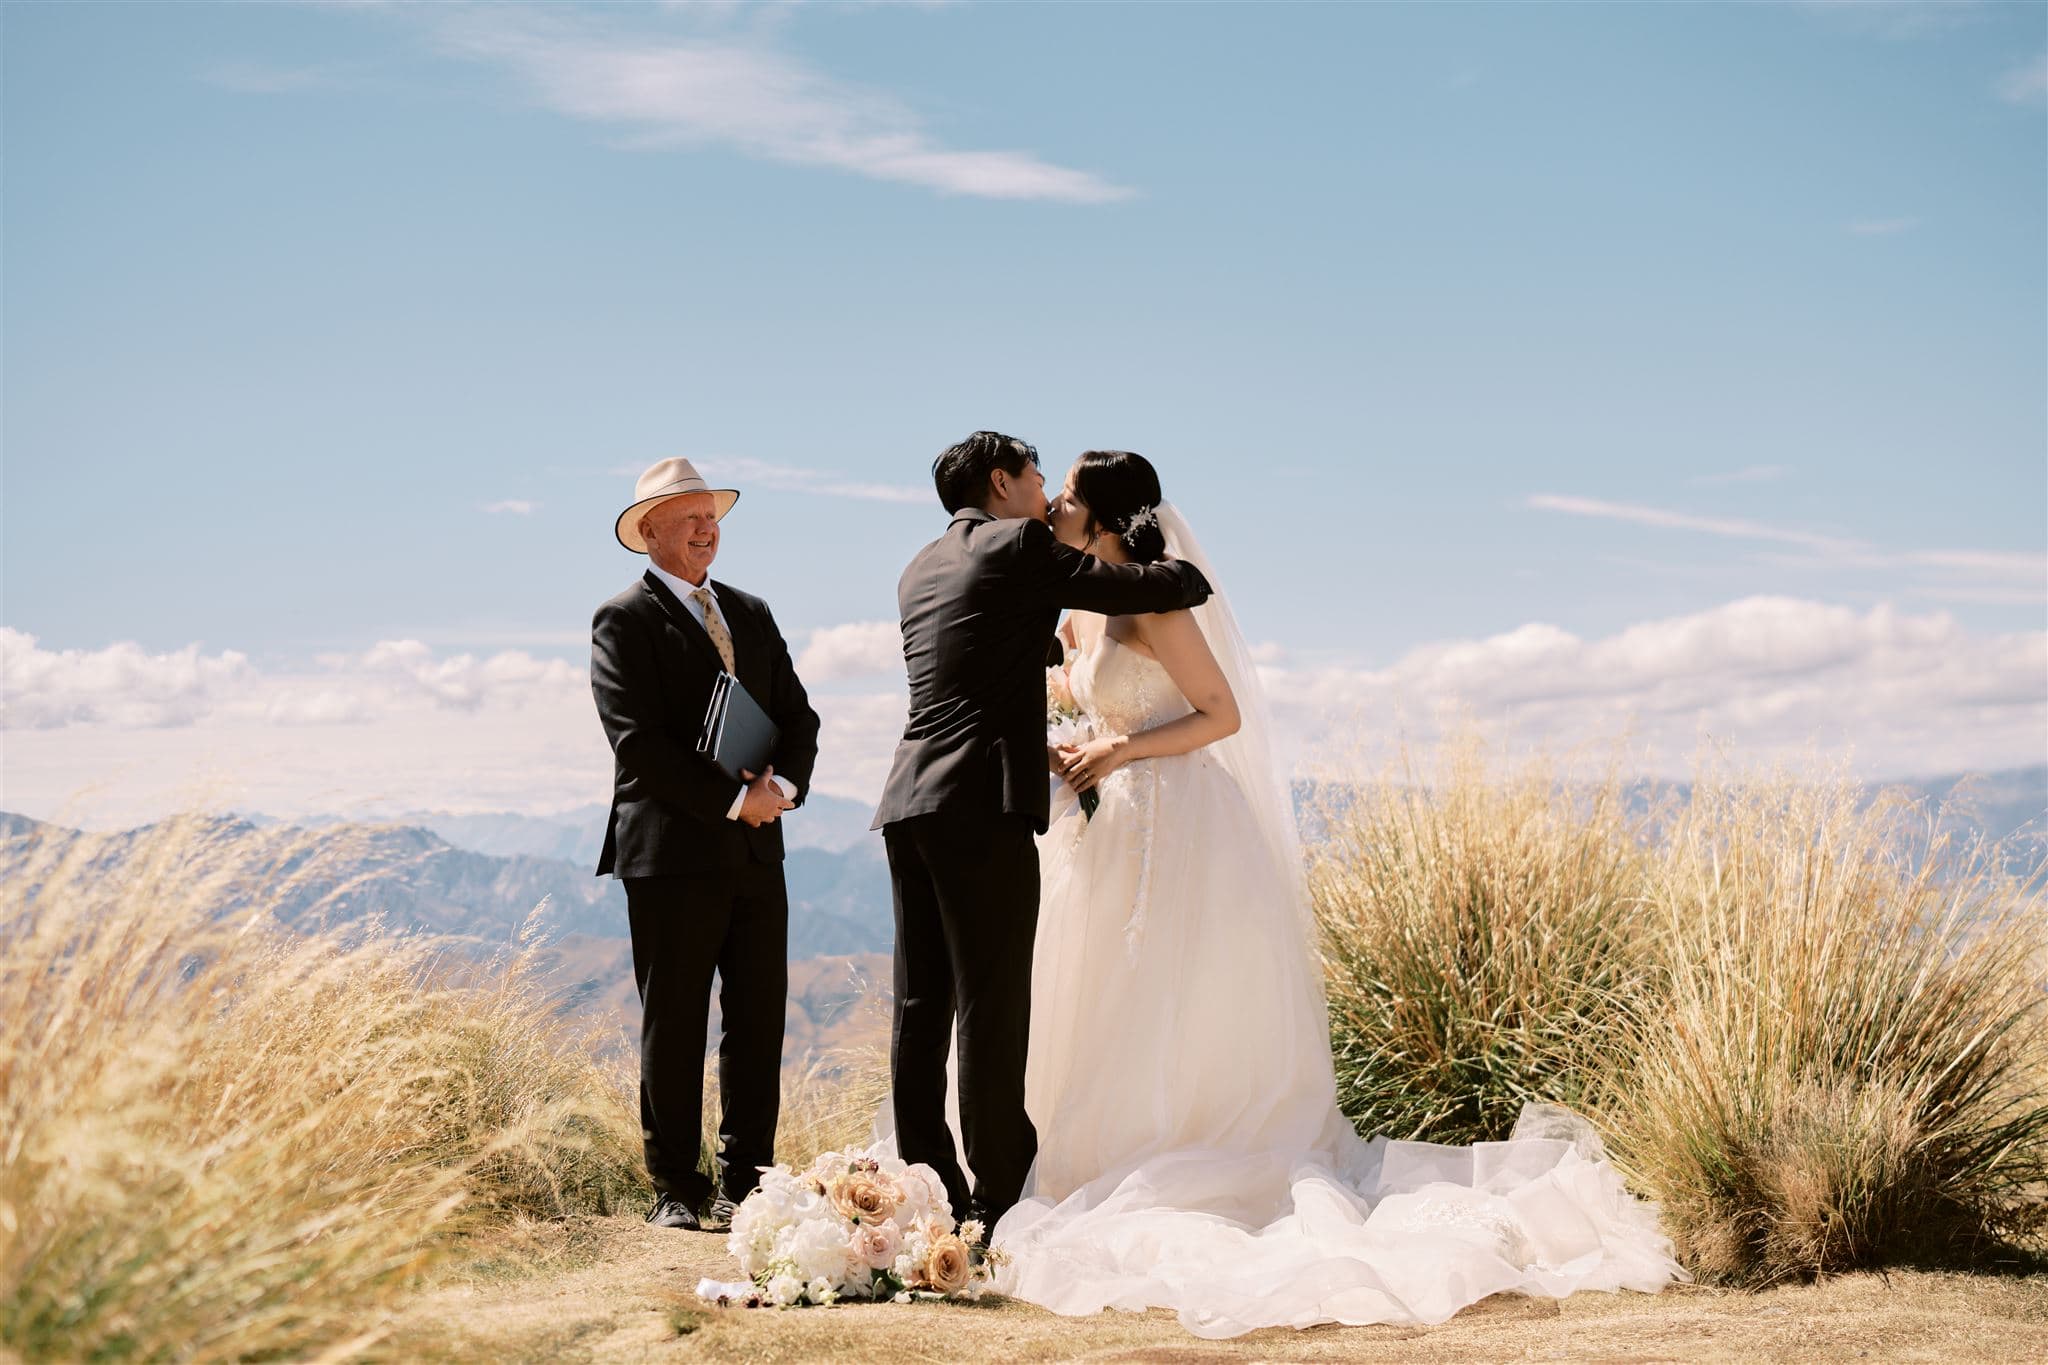 Queenstown New Zealand Heli Wedding Elopement Photographer クイーンズタウン　ニュージーランド　エロープメント 結婚式 | A couple exchanging a kiss at their outdoor wedding ceremony in Queenstown, officiated by a man in a hat, with scenic mountains in the background.